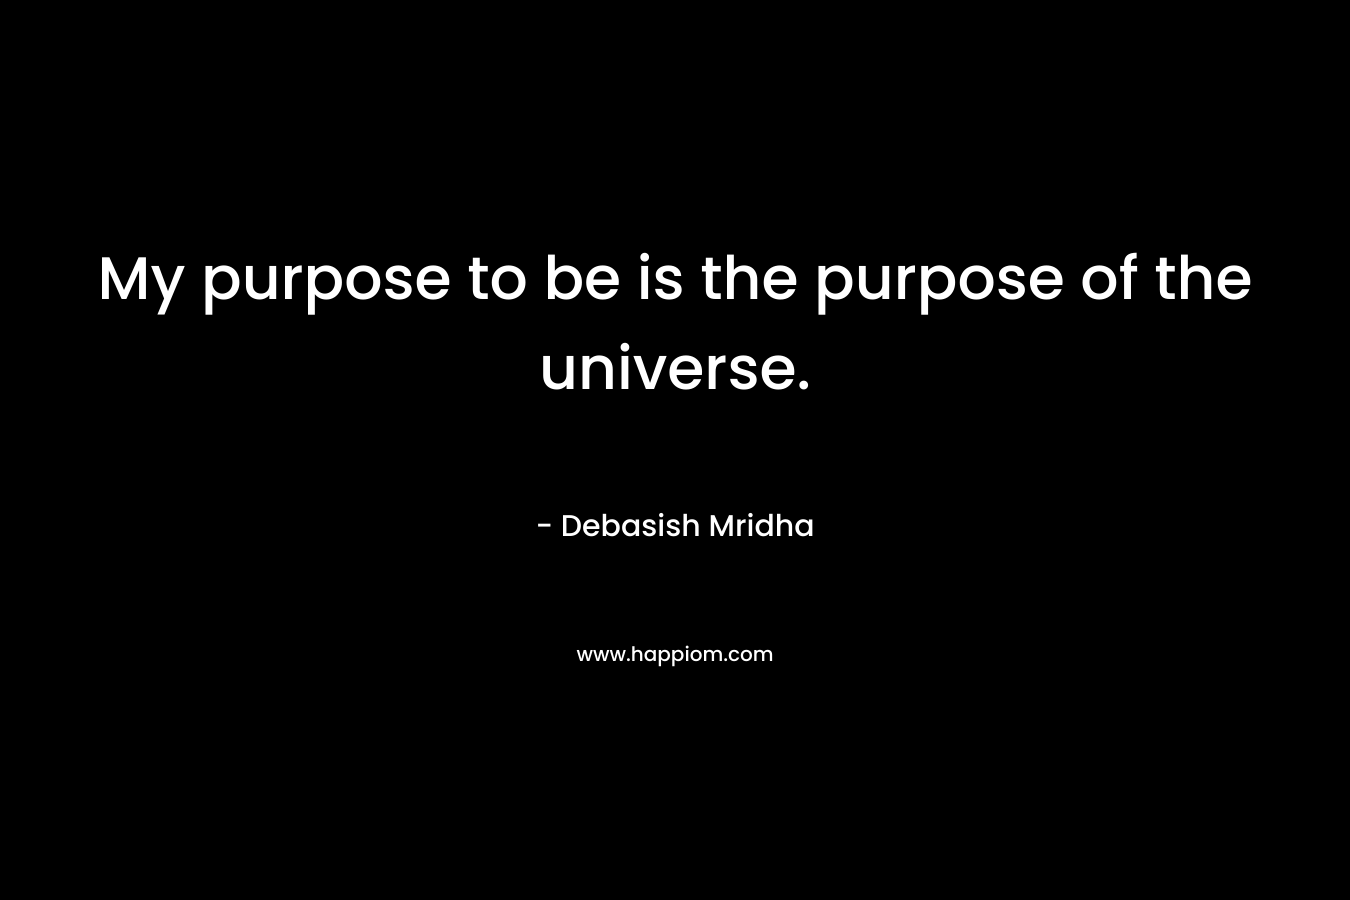 My purpose to be is the purpose of the universe.